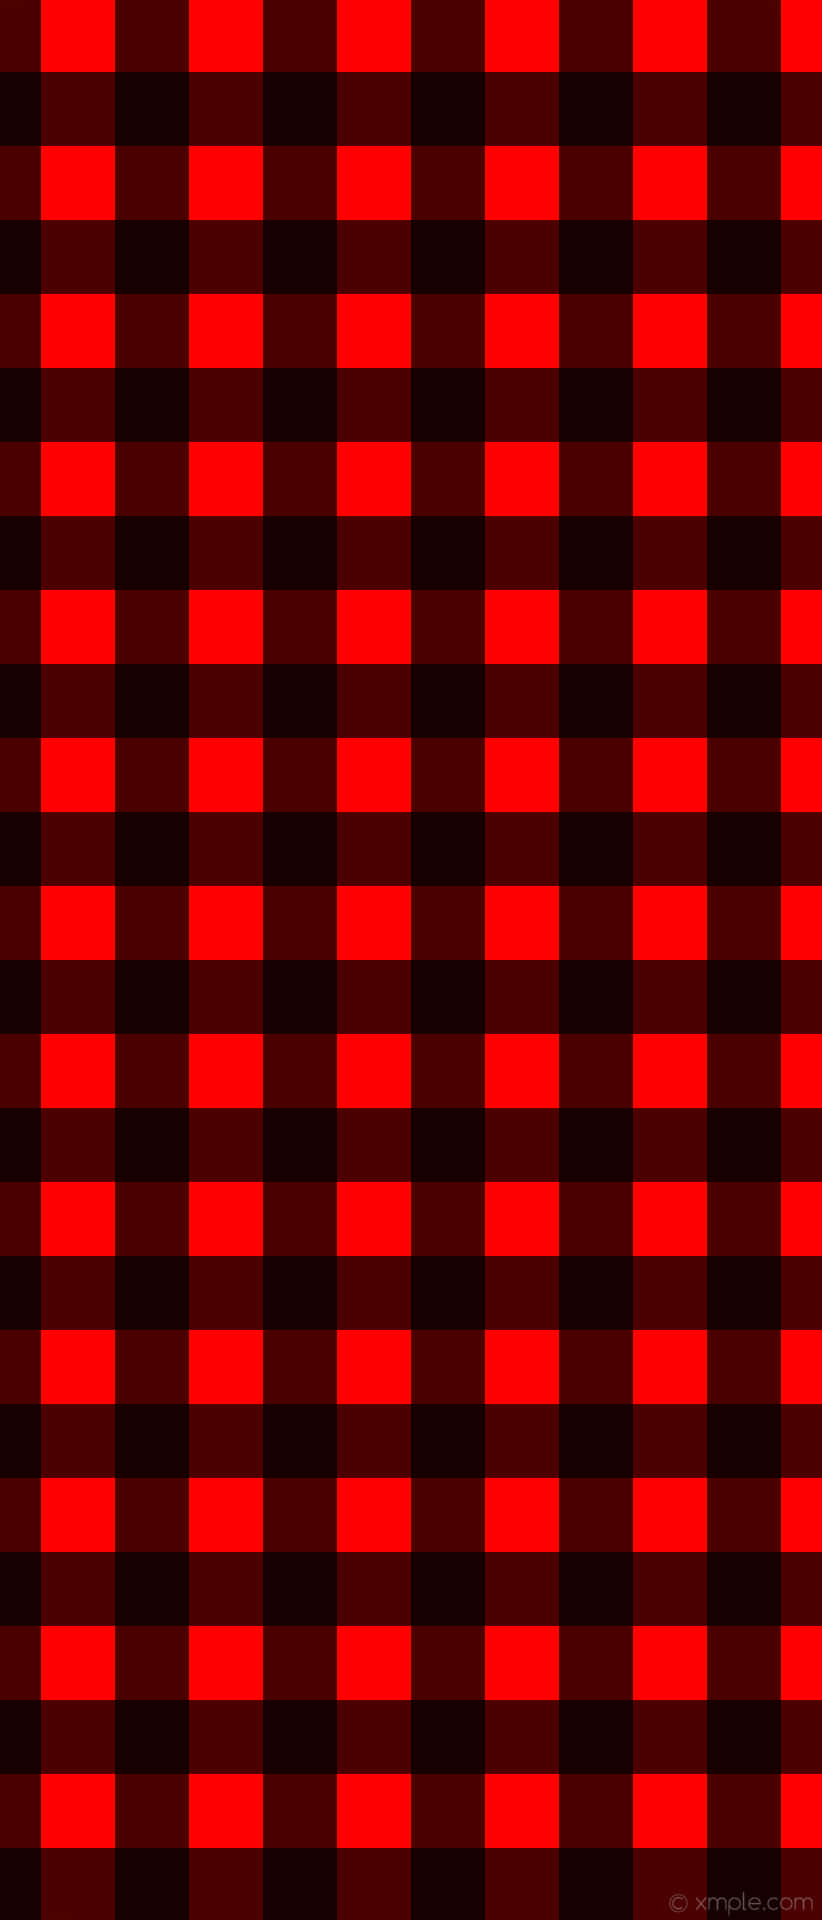 Small Black And Red Plaid Squares Wallpaper